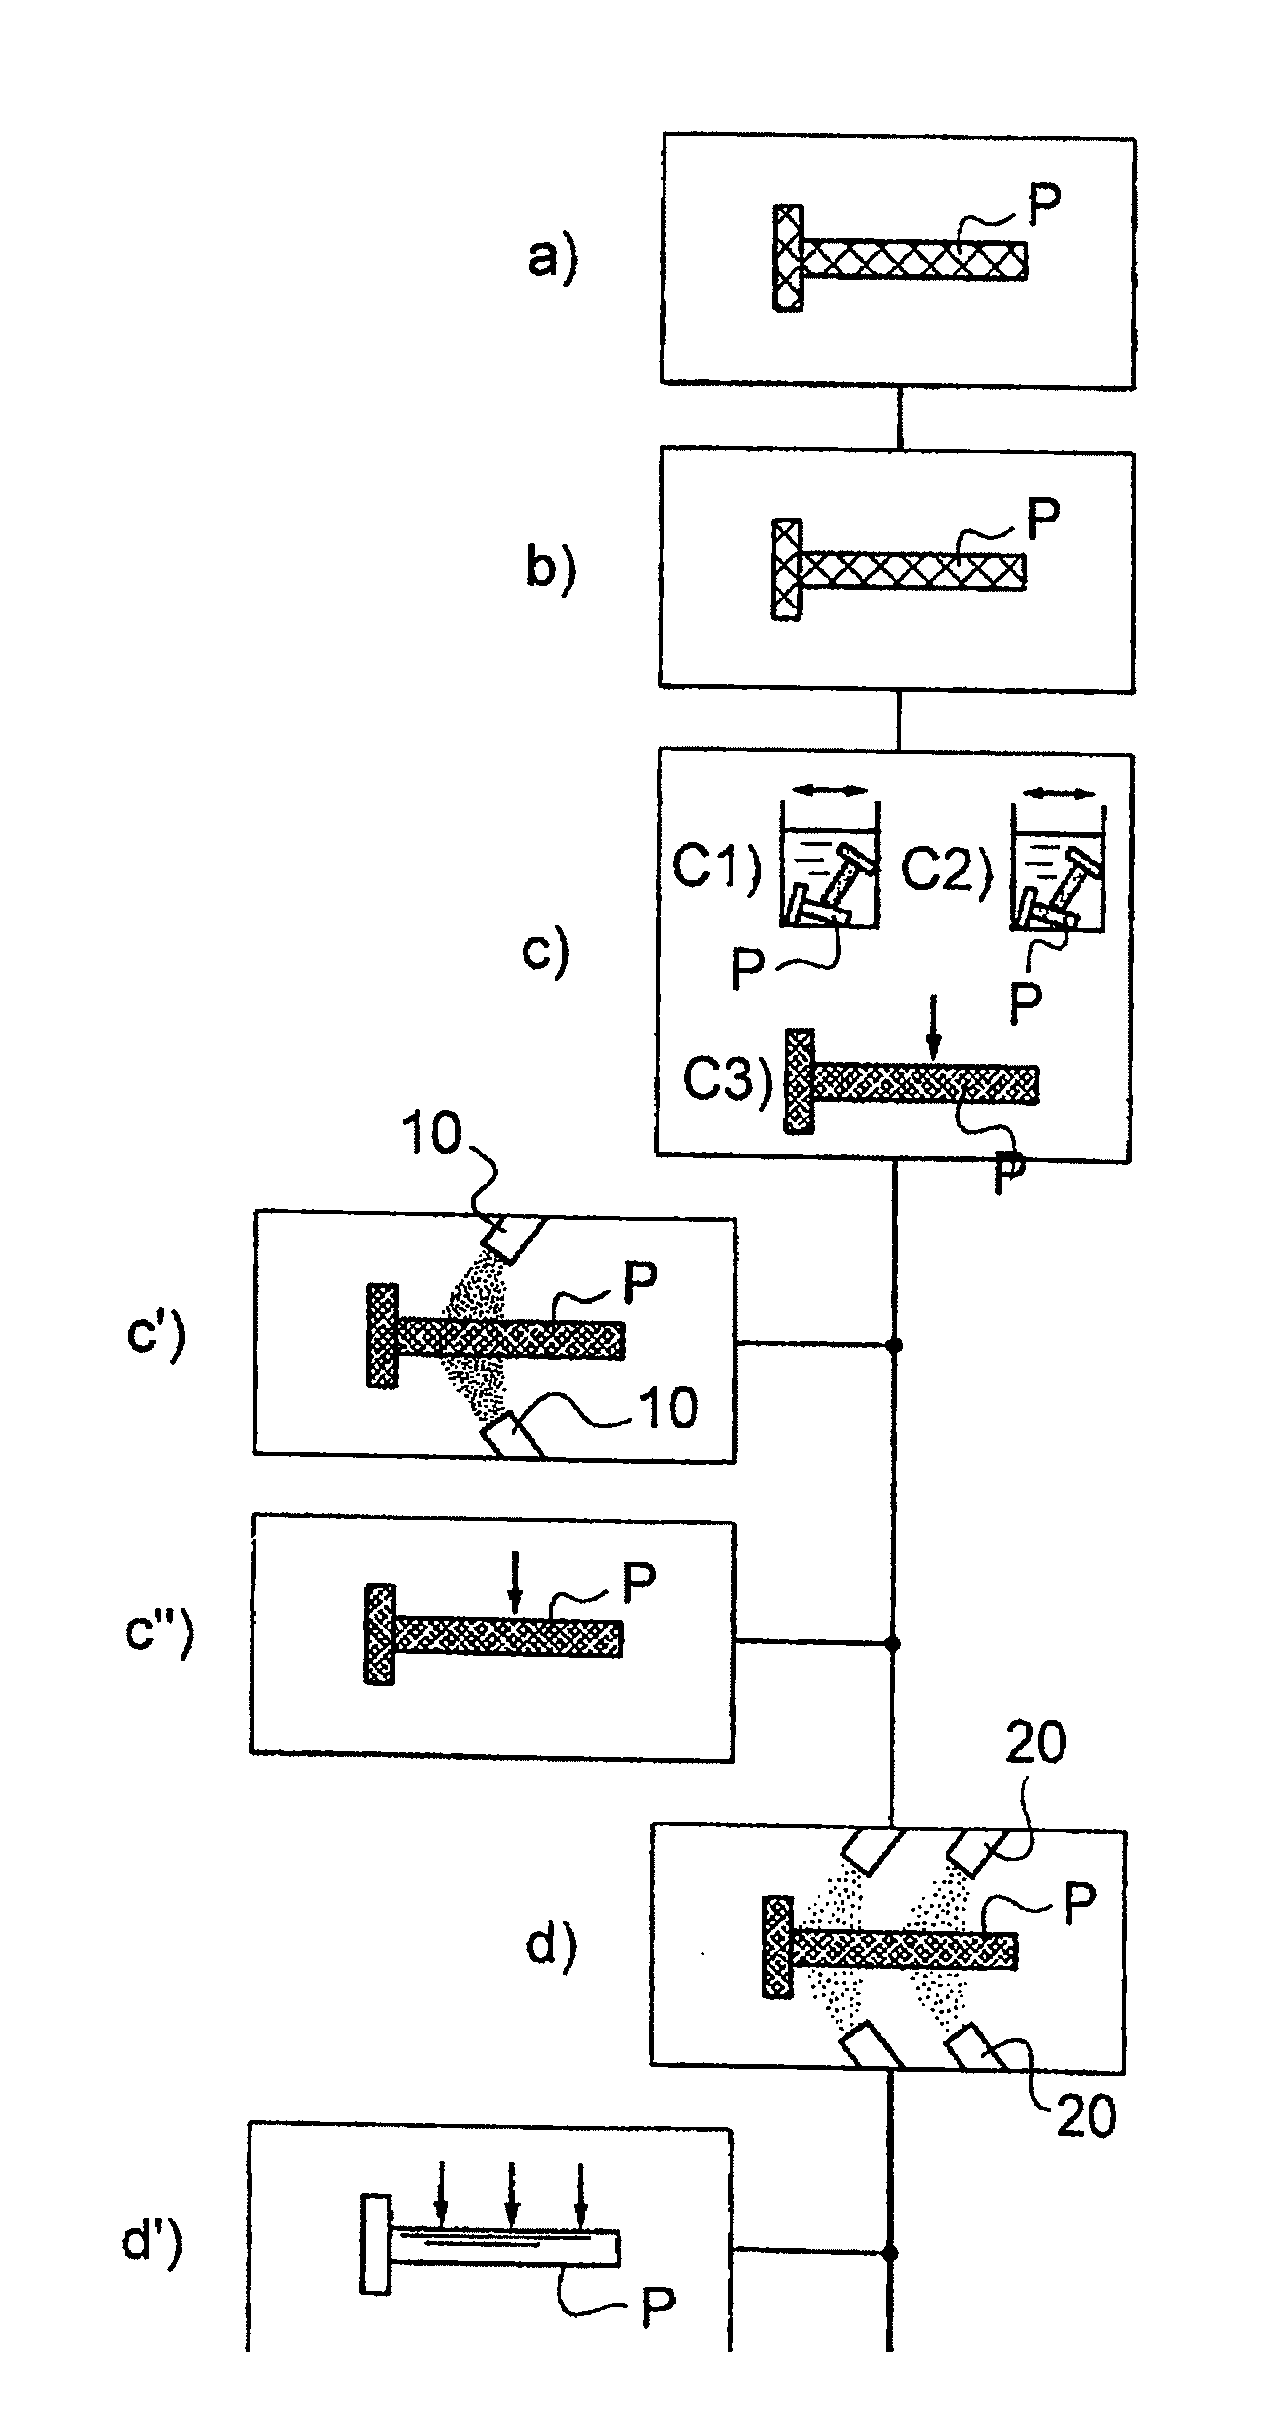 Method of surface treating a mechanical part made of high-strength steel, and a sealing system obtained by implementing said method